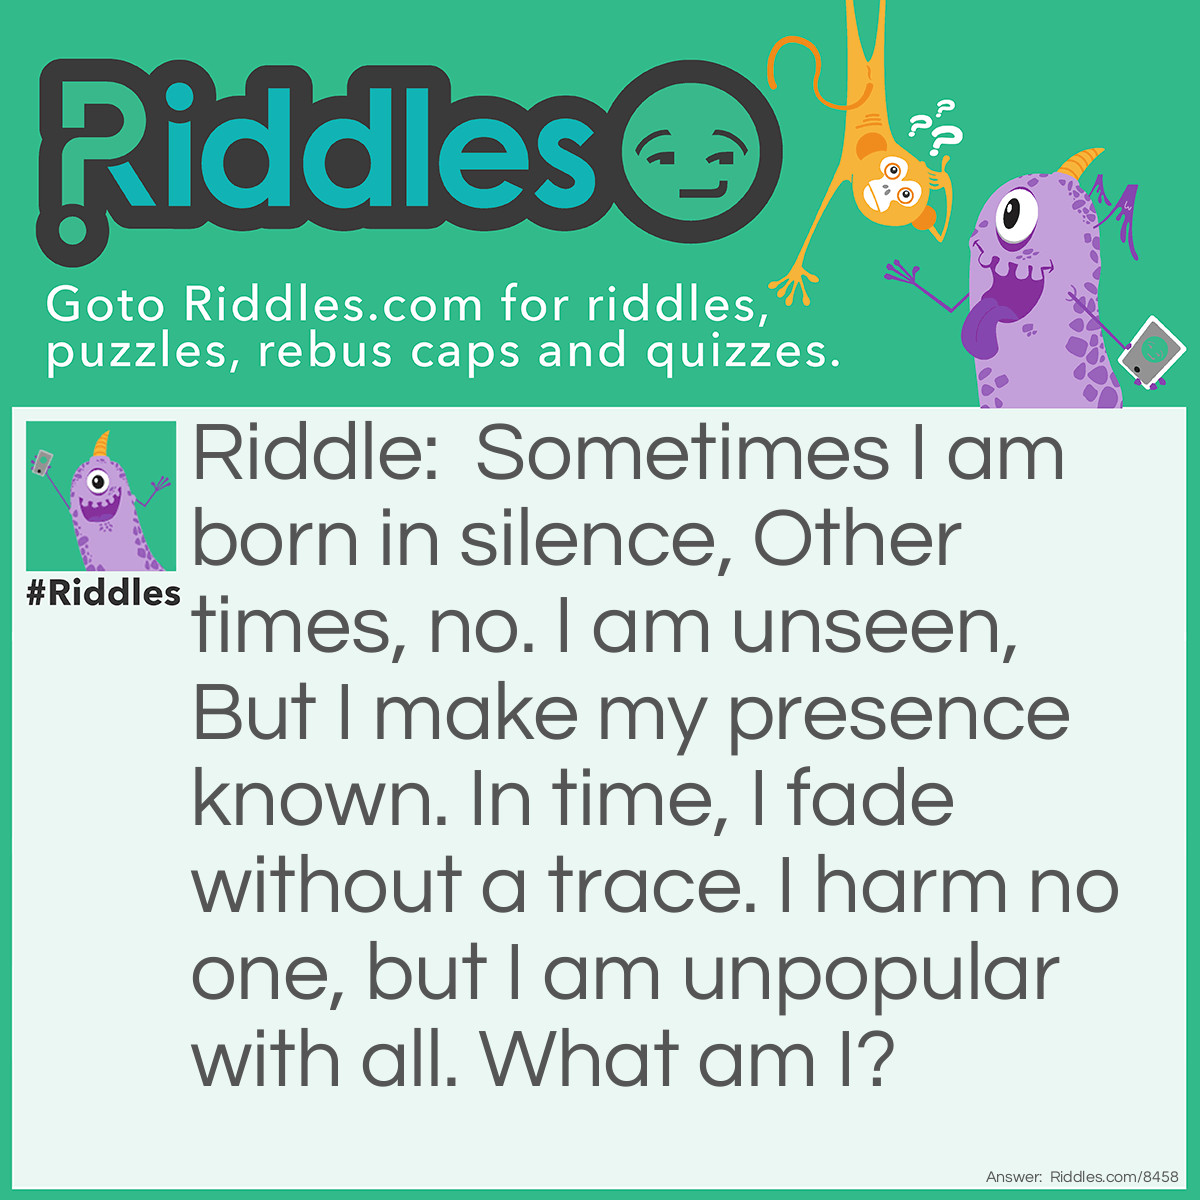 Riddle: Sometimes I am born in silence, Other times, no. I am unseen, But I make my presence known. In time, I fade without a trace. I harm no one, but I am unpopular with all. What am I? Answer: A fart.